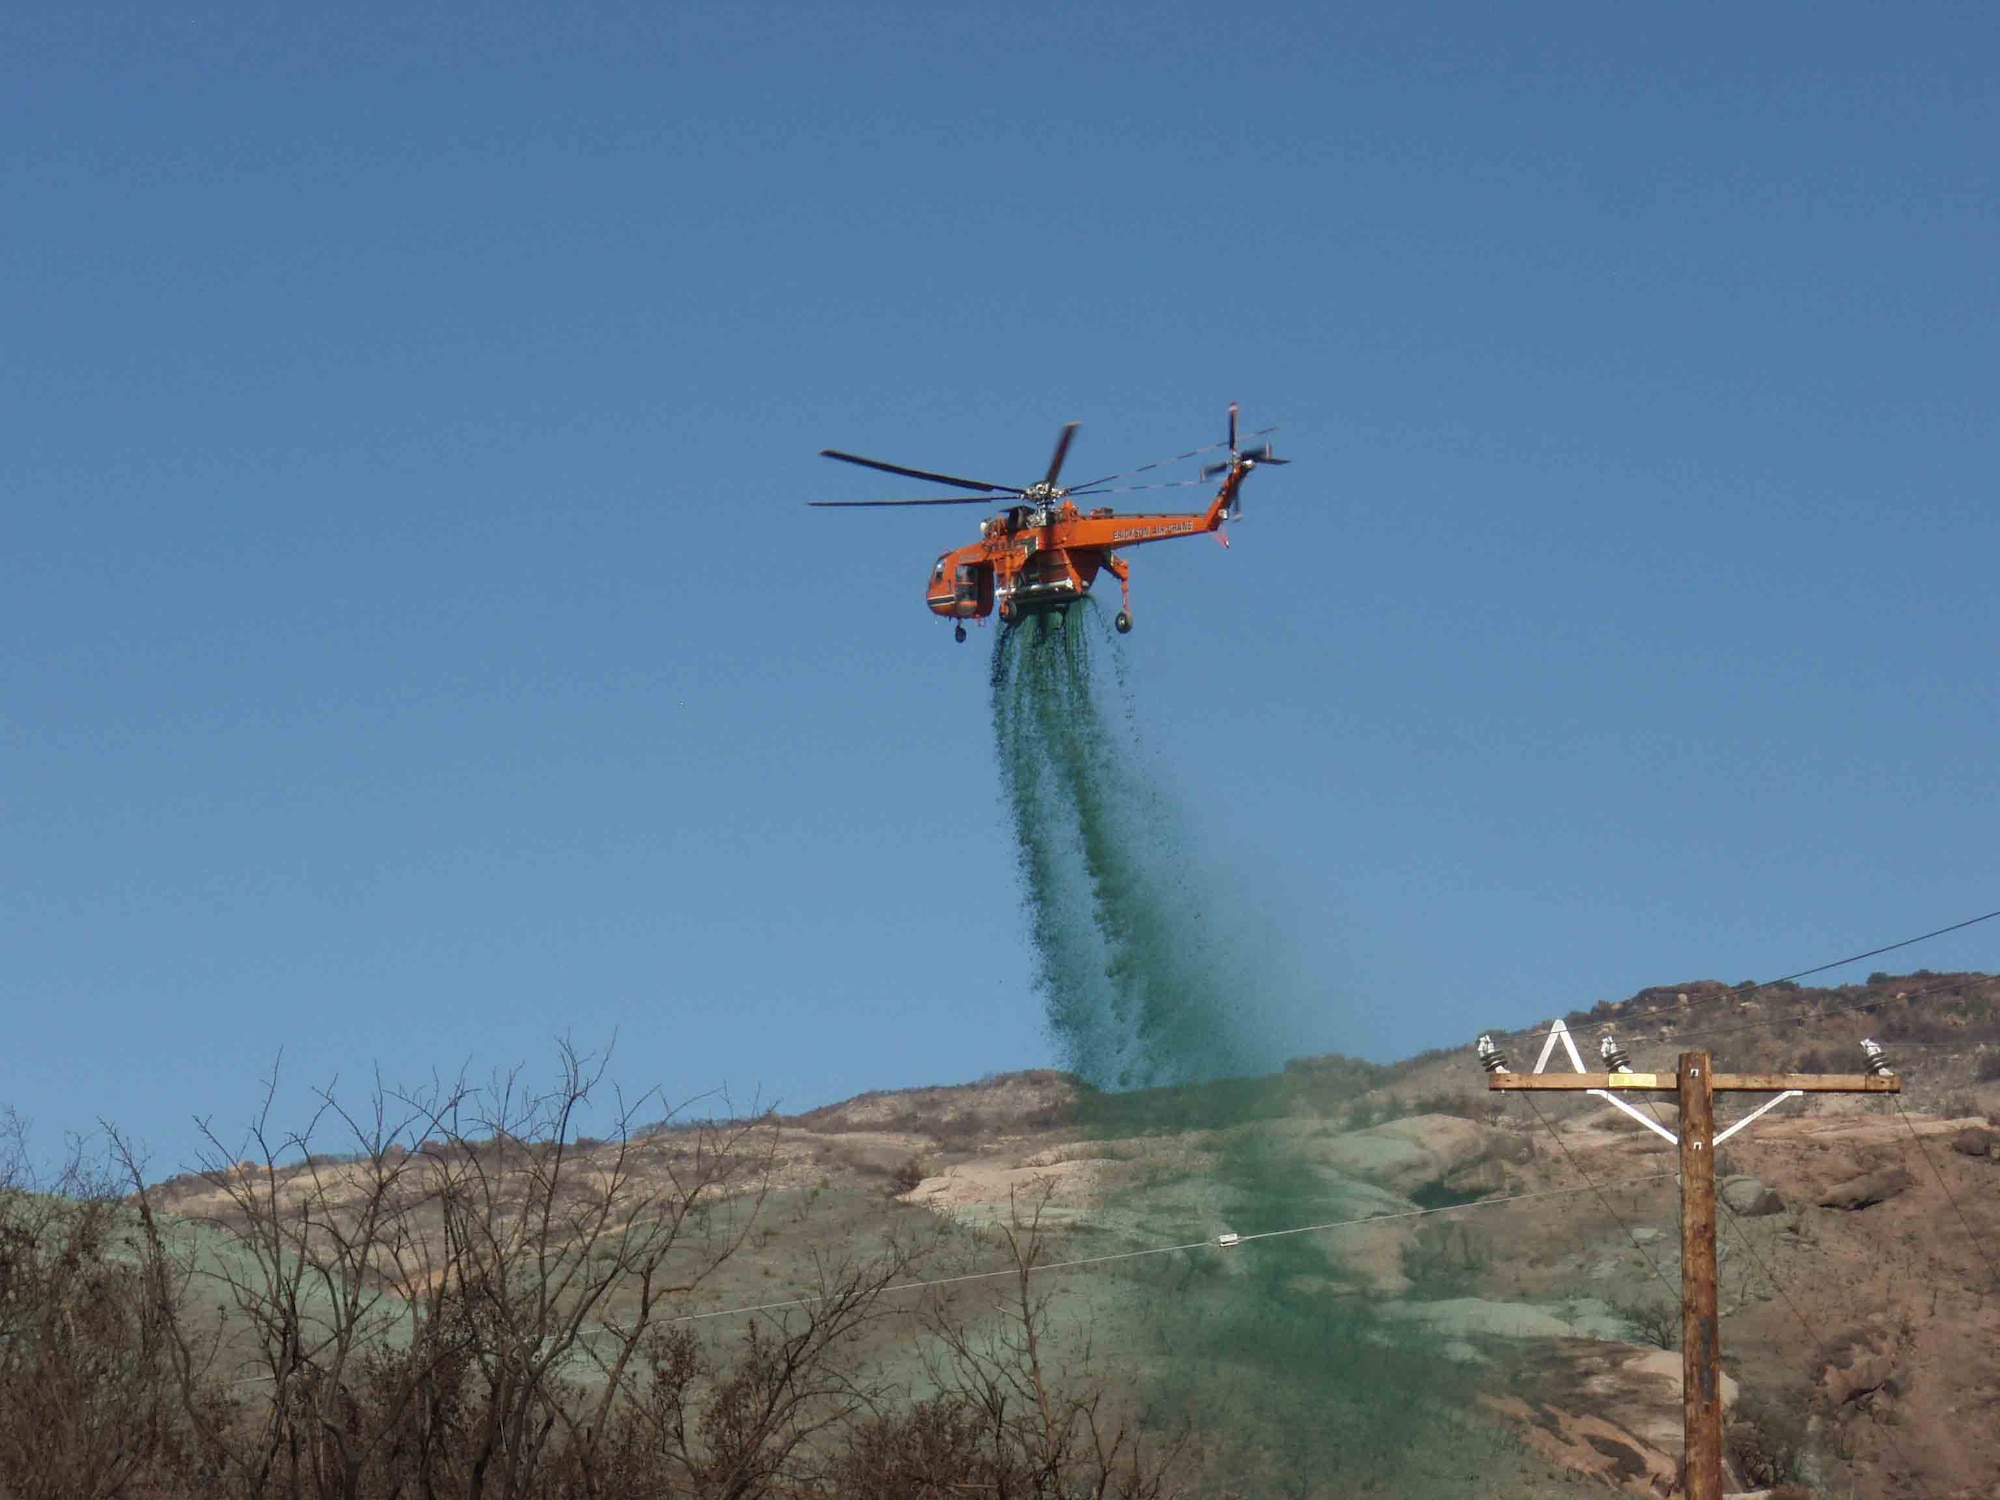 Hydromulch is sprayed after a fire in Santa Barbara, CA for reseeding and erosion control.  The mulch, made of recycled newspaper, can be applied as soon as a fire is out. (Courtesy photo)